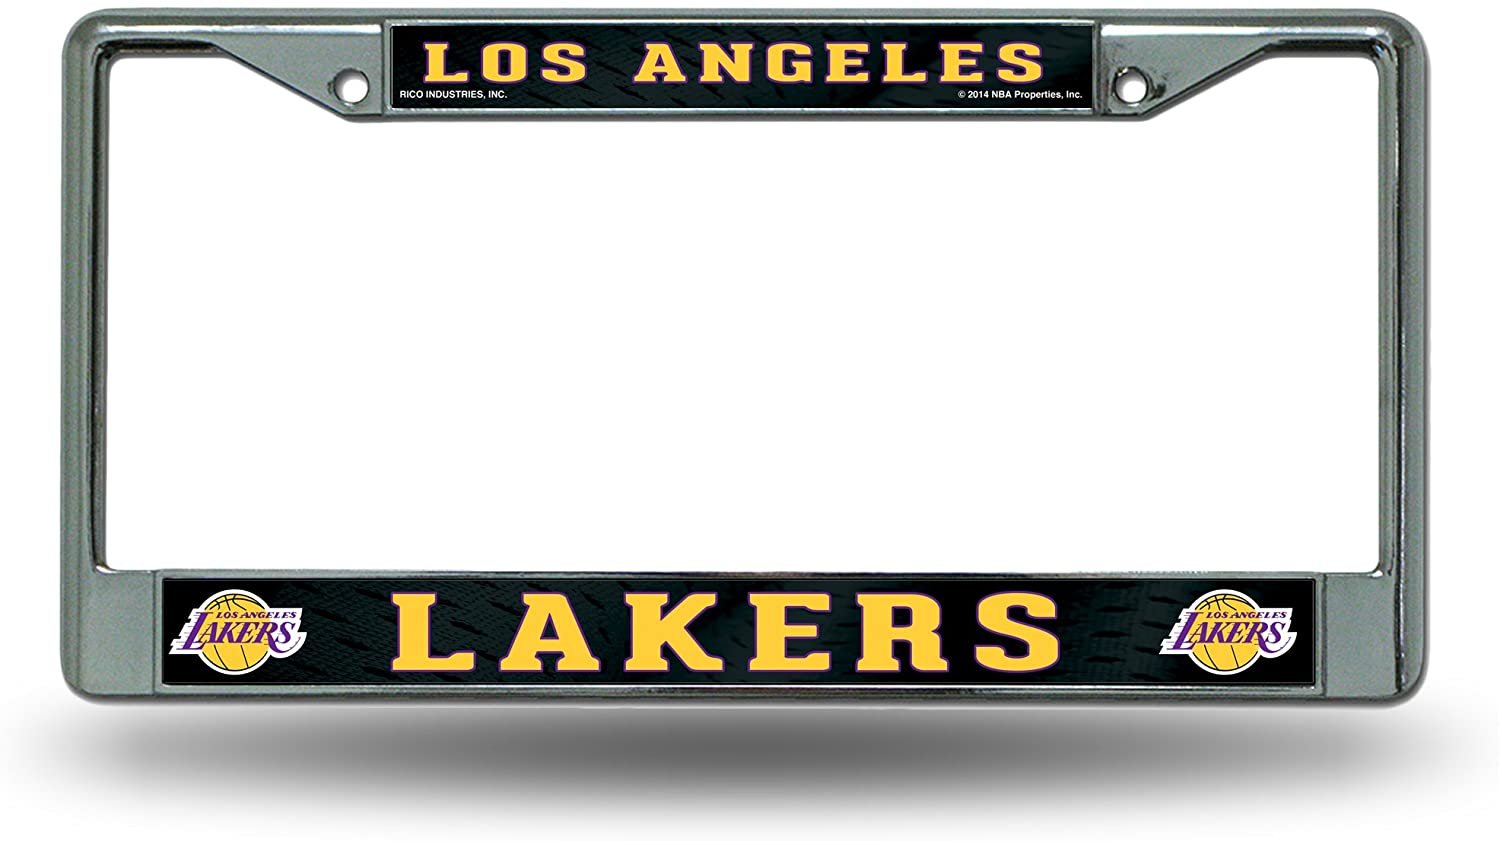 Los Angeles Lakers Premium Metal License Plate Frame Chrome Tag Cover, 12x6 Inch